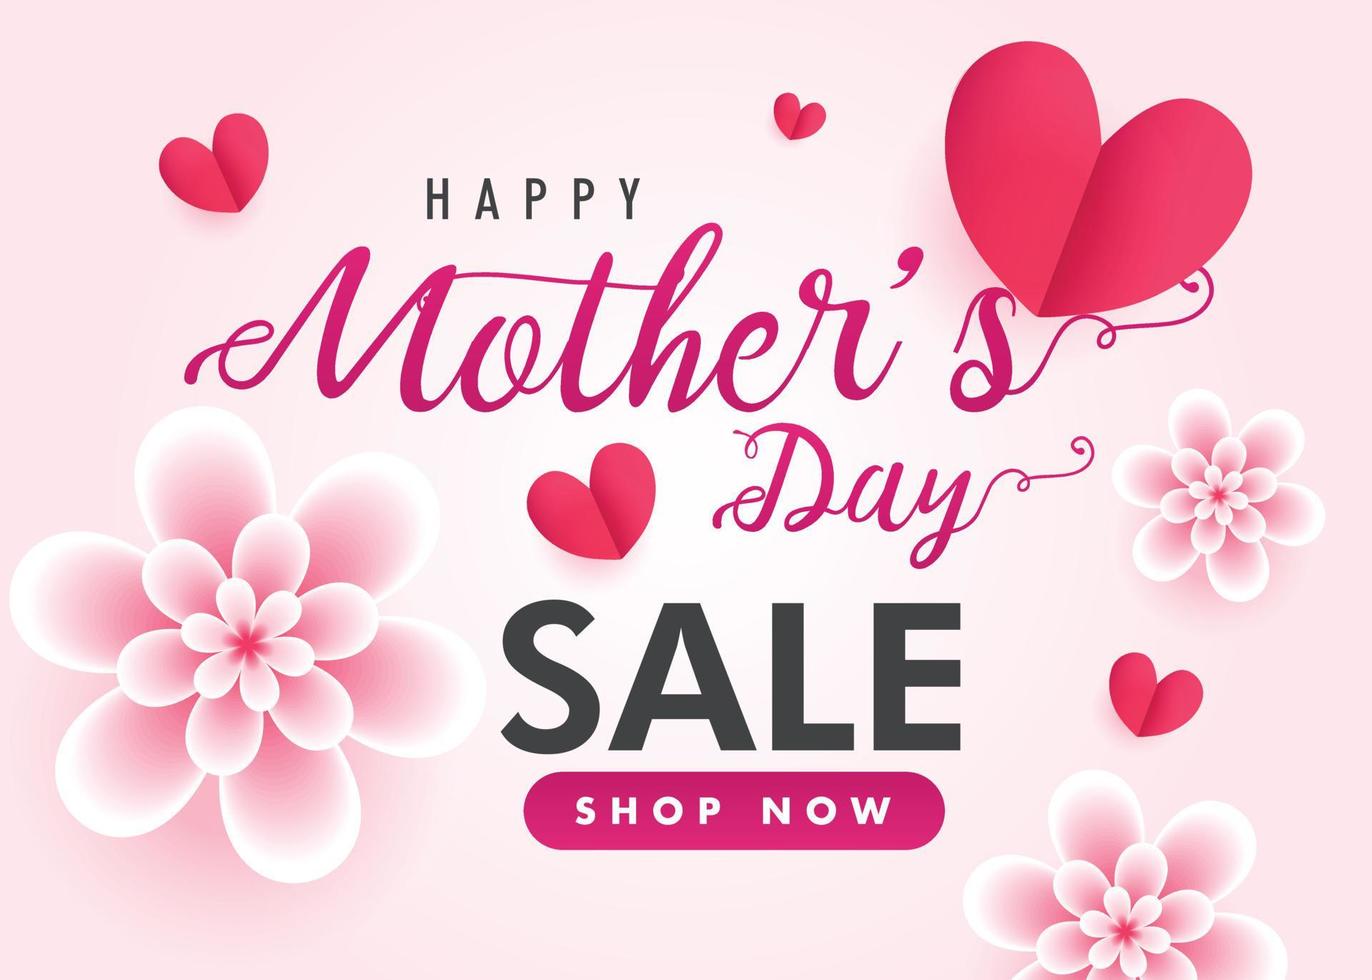 Happy Mother's Day sale banner design, elegant shop now realistic Mothers Day wallpaper with heart and flower illustration vector poster